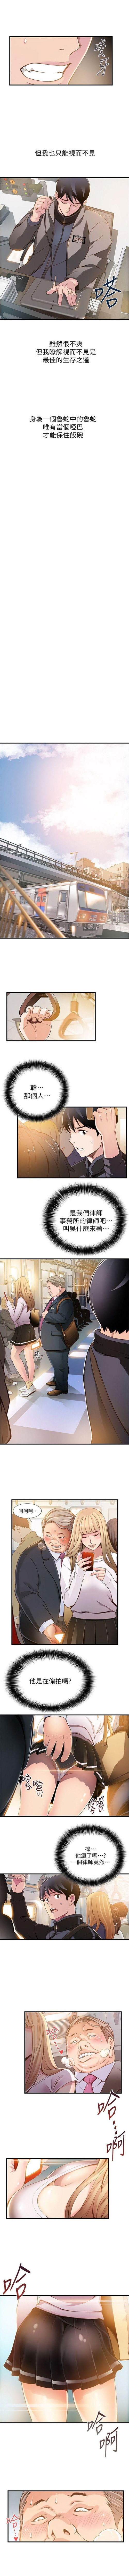 Teasing 弱點 1-89 官方中文（連載中） Abuse - Page 7